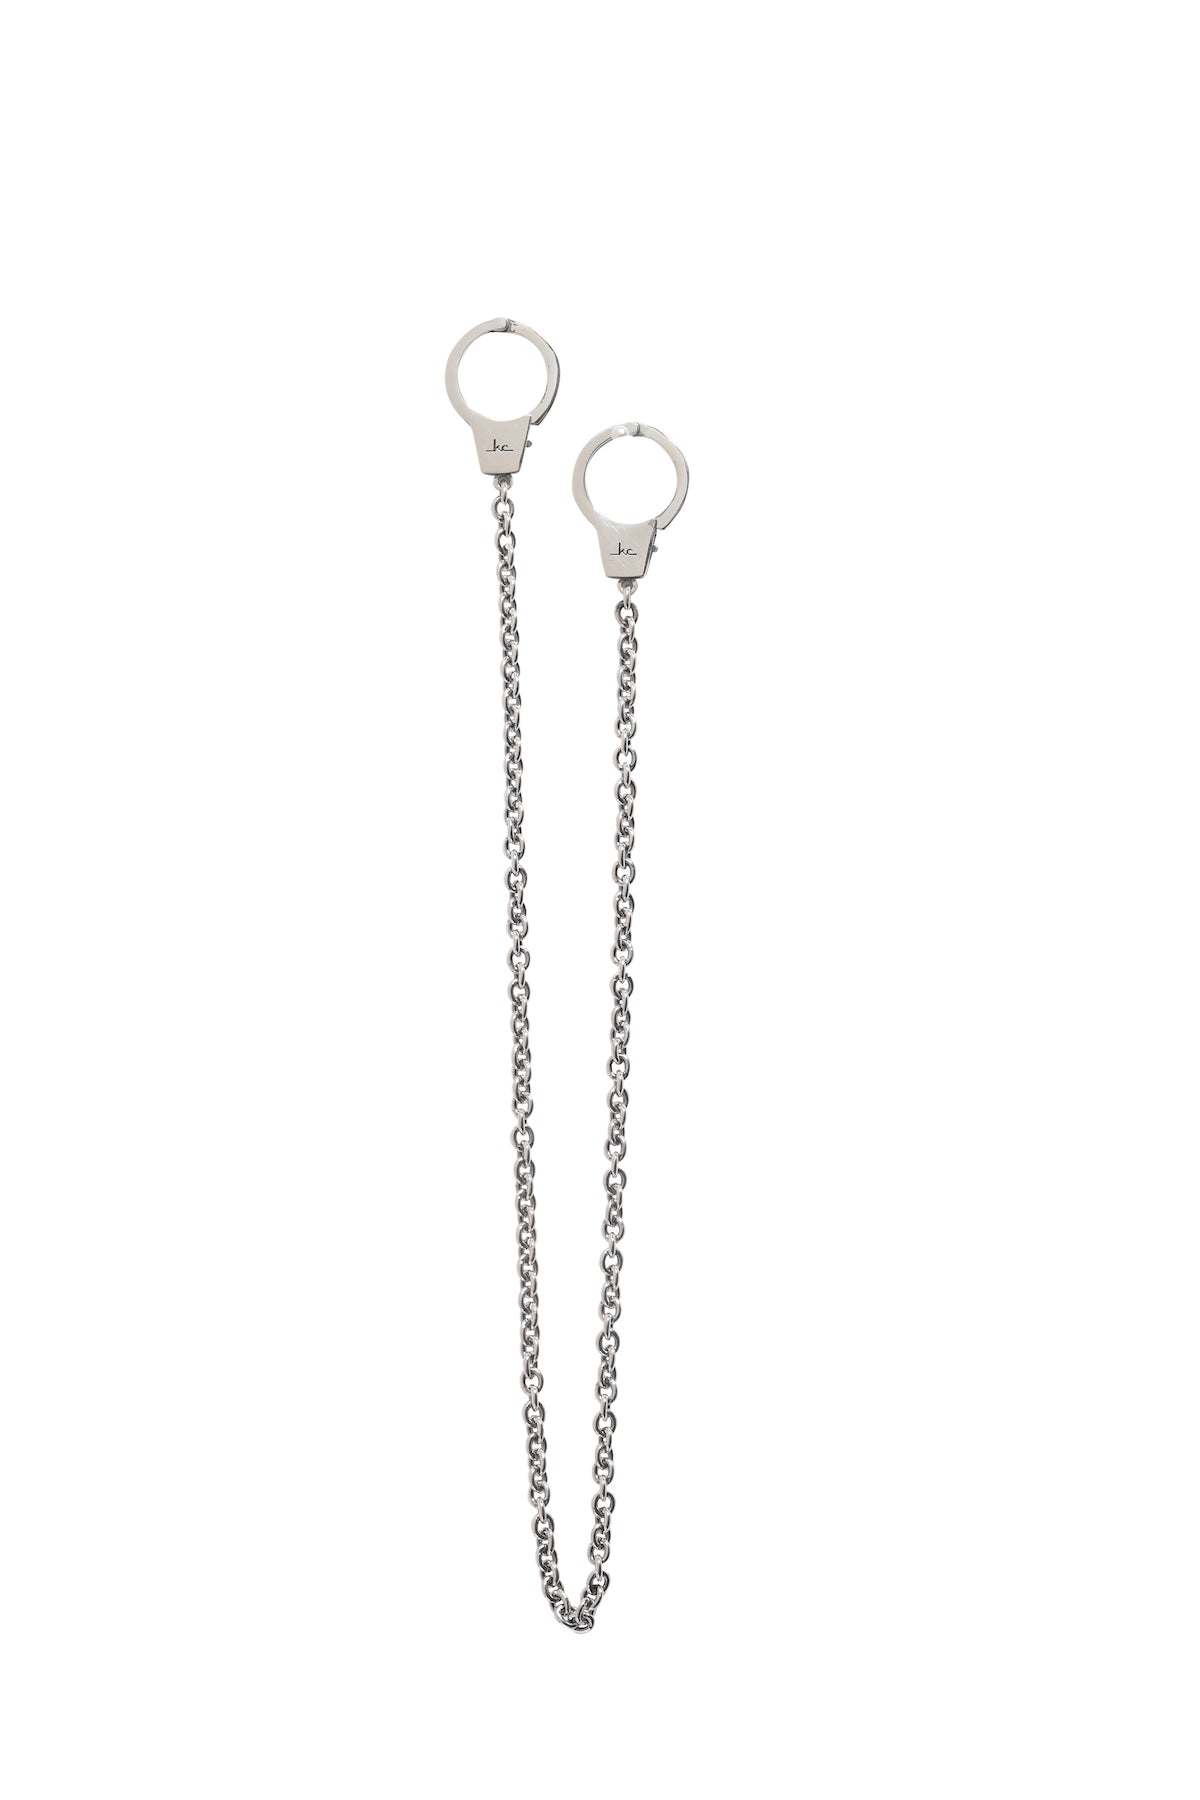 Kelly Cole Sterling Silver Functional Handcuff Necklace - Kelly Cole USA